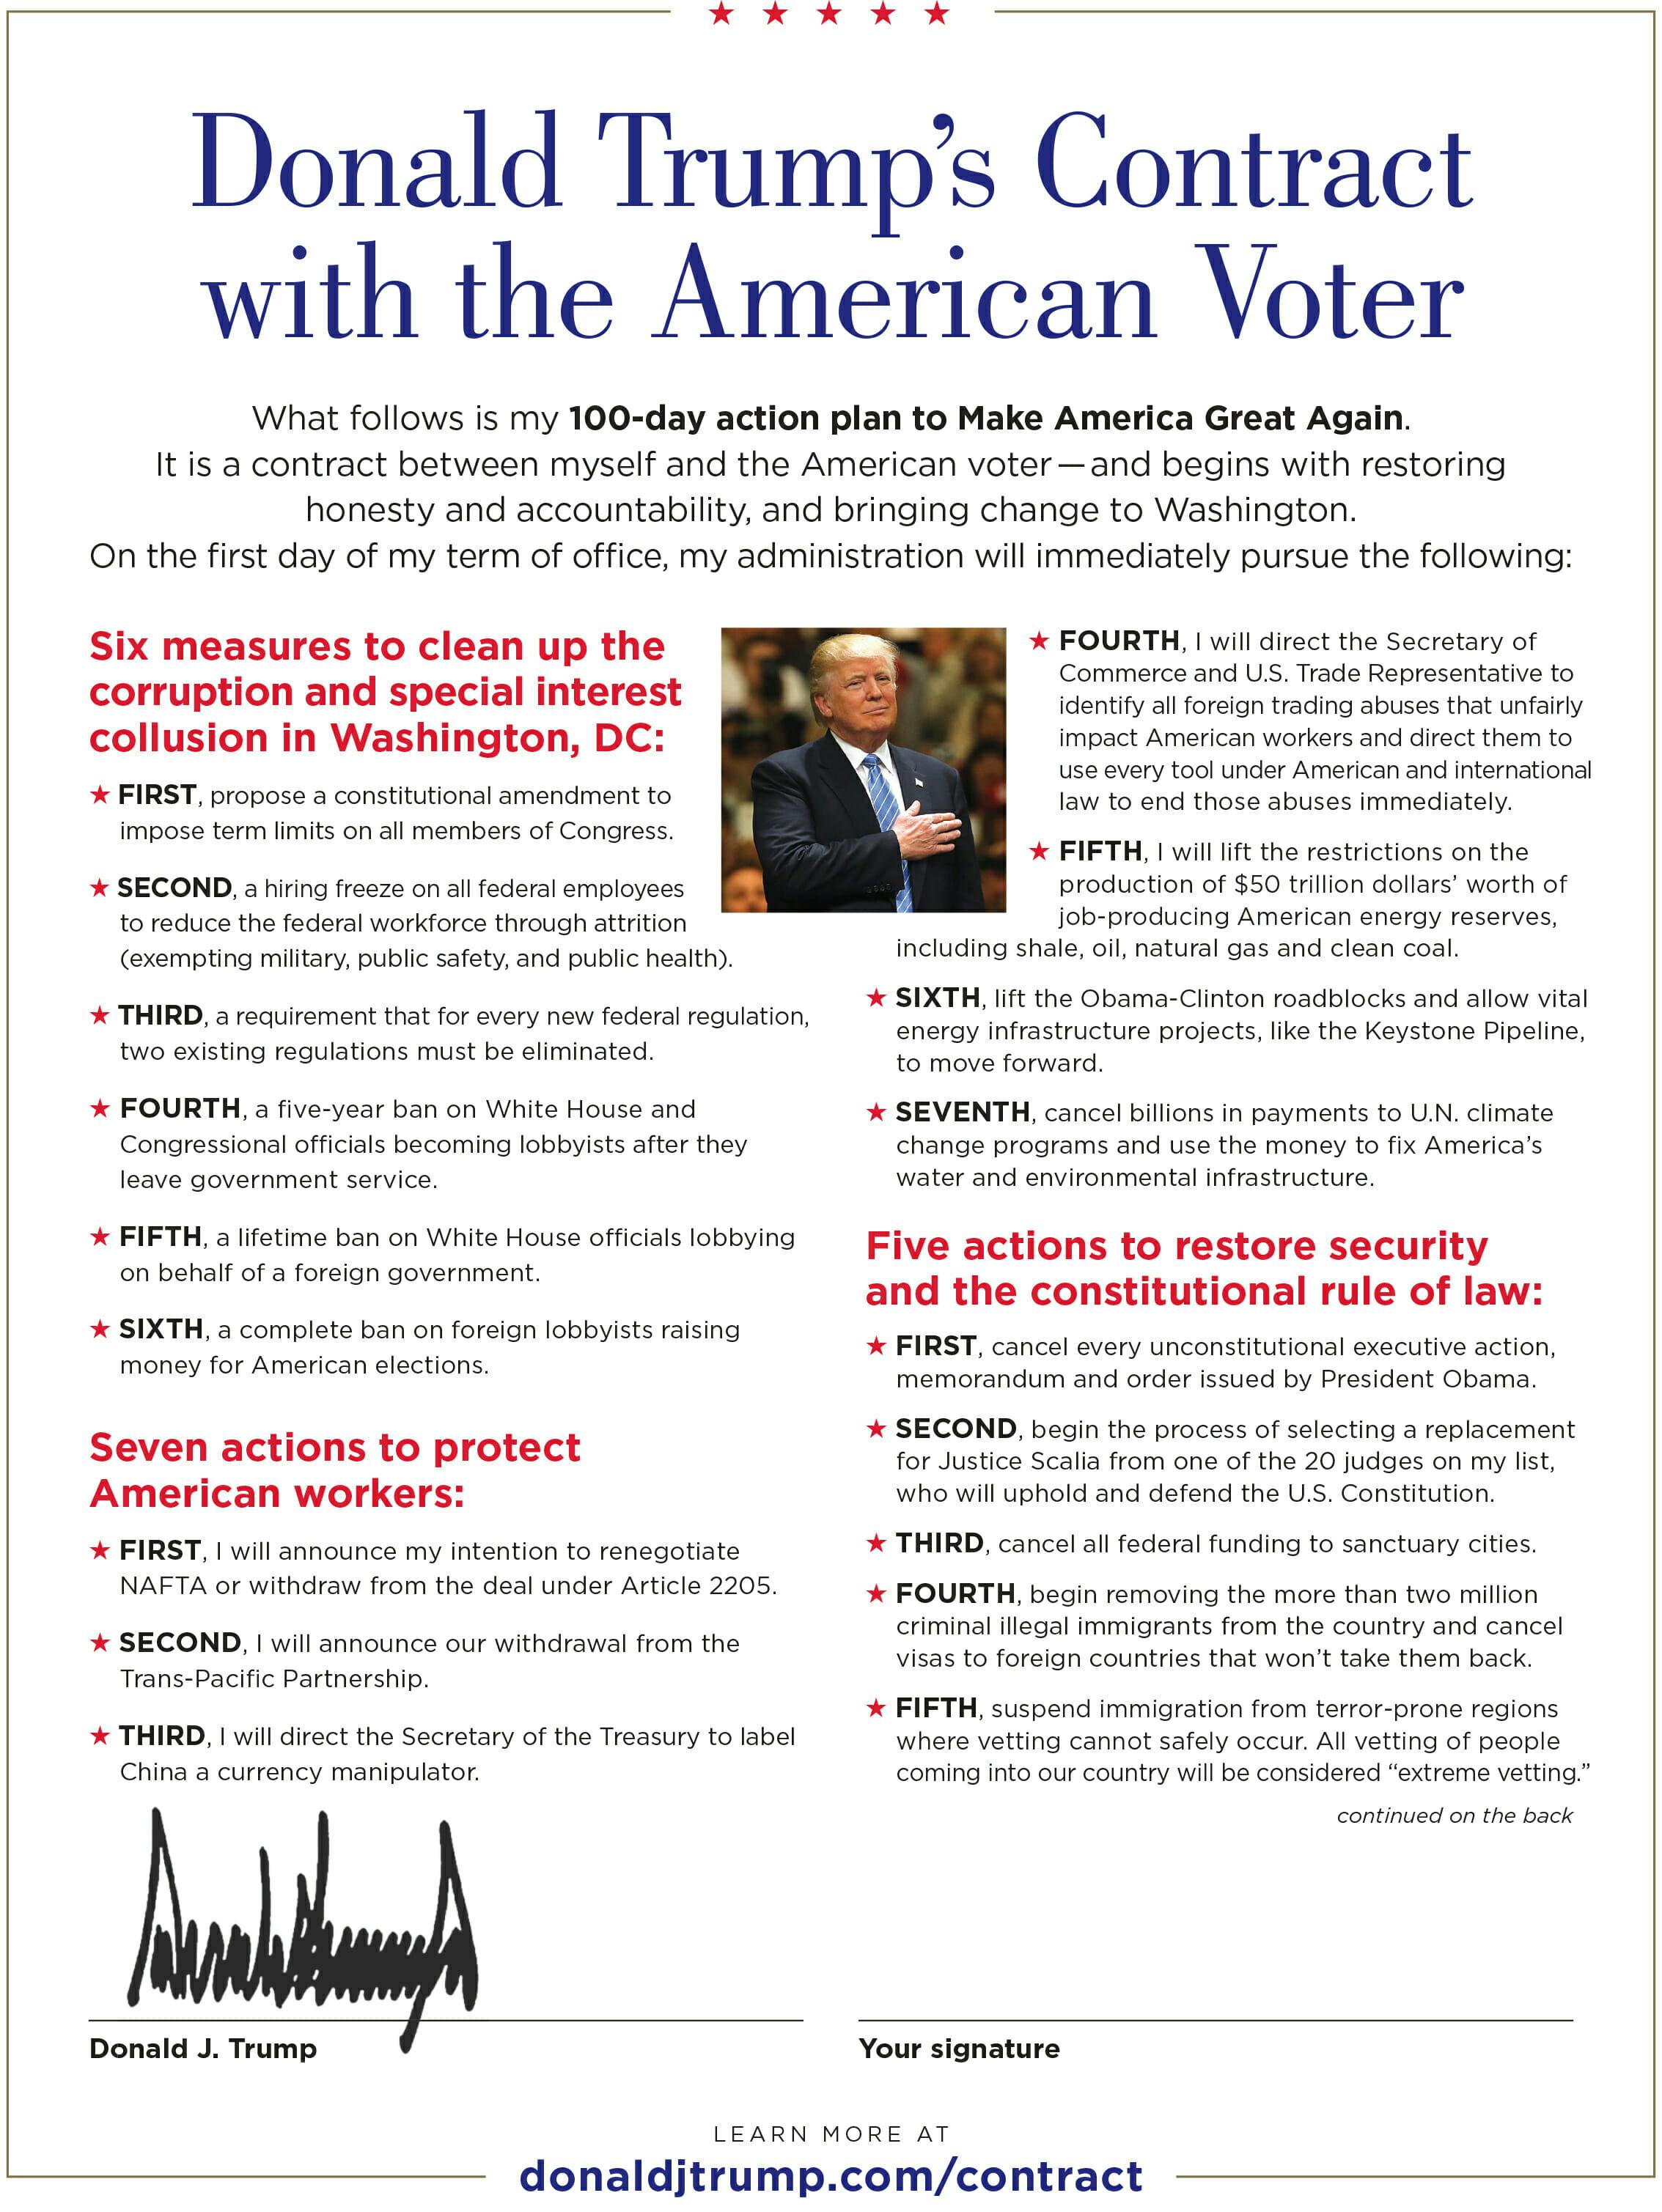 Donald Trump Contract with the American Voter